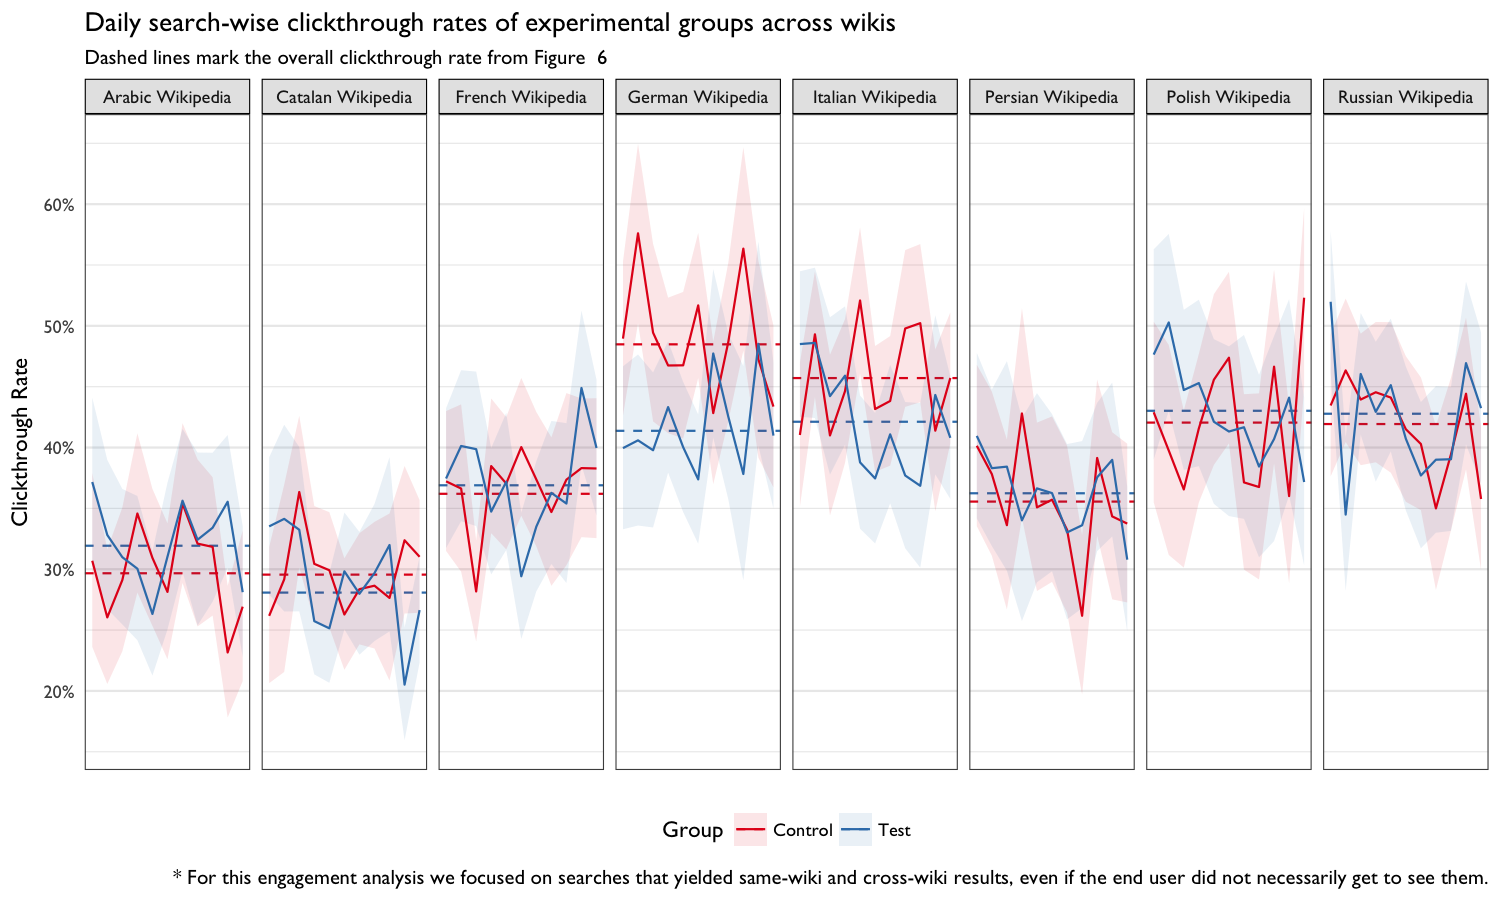 **Figure 7**: Day-by-day clickthrough rates of experimental groups, split by wiki.